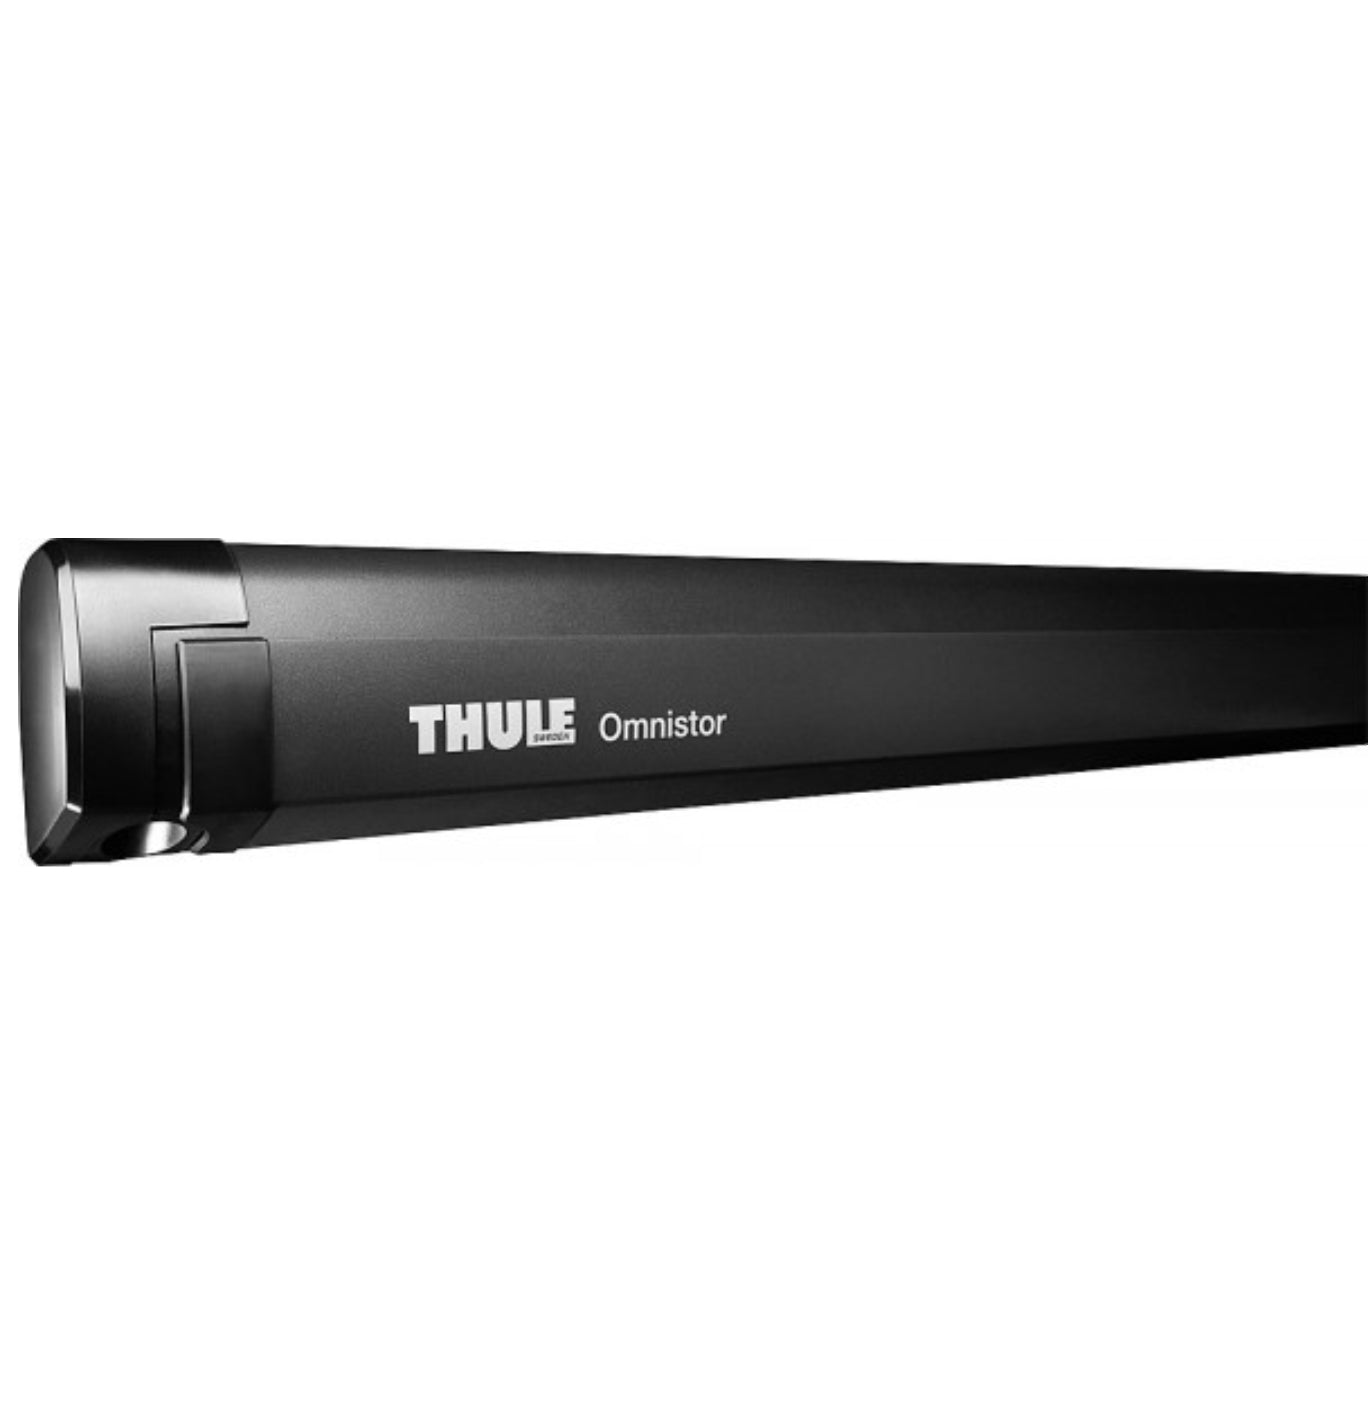 Thule Omnistor 5200 | 3.52m Anthracite | Wall Mounted Awning | 301223 Image